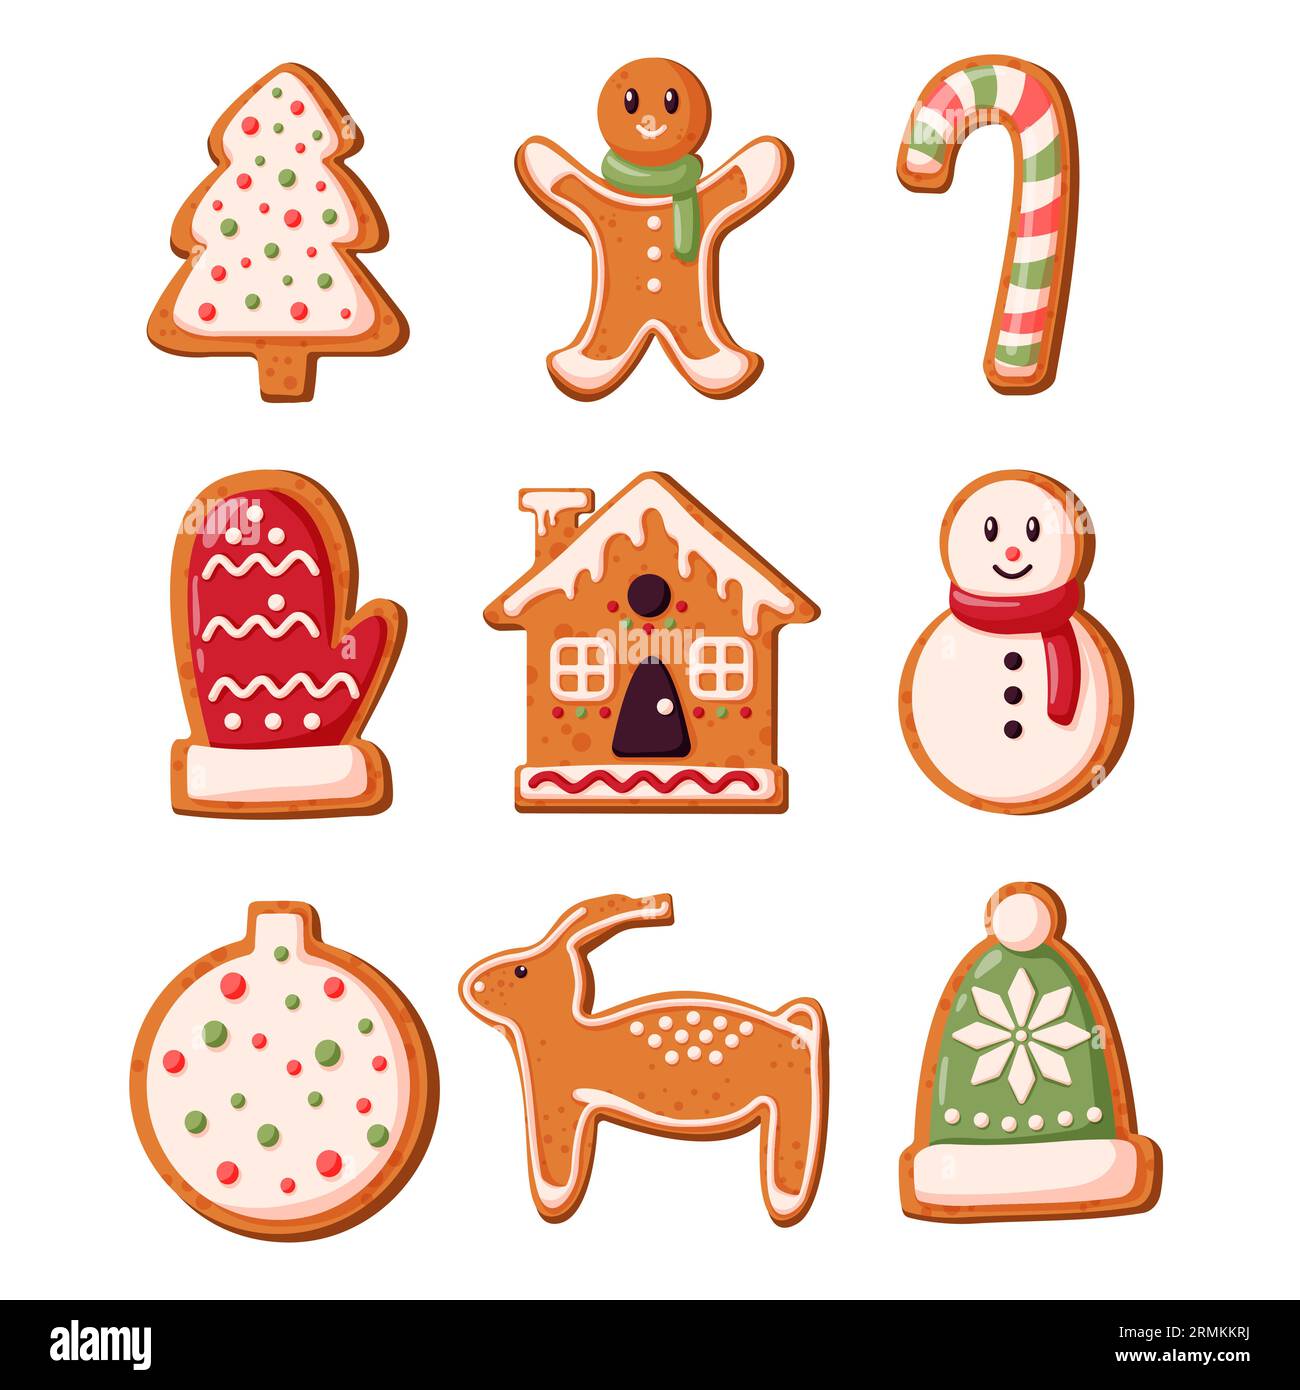 Gingerbread cookies collection in cartoon style. Winter homemade sweets in shape of house, gingerbread man, christmas tree, reindeer, mitten, snowman Stock Vector